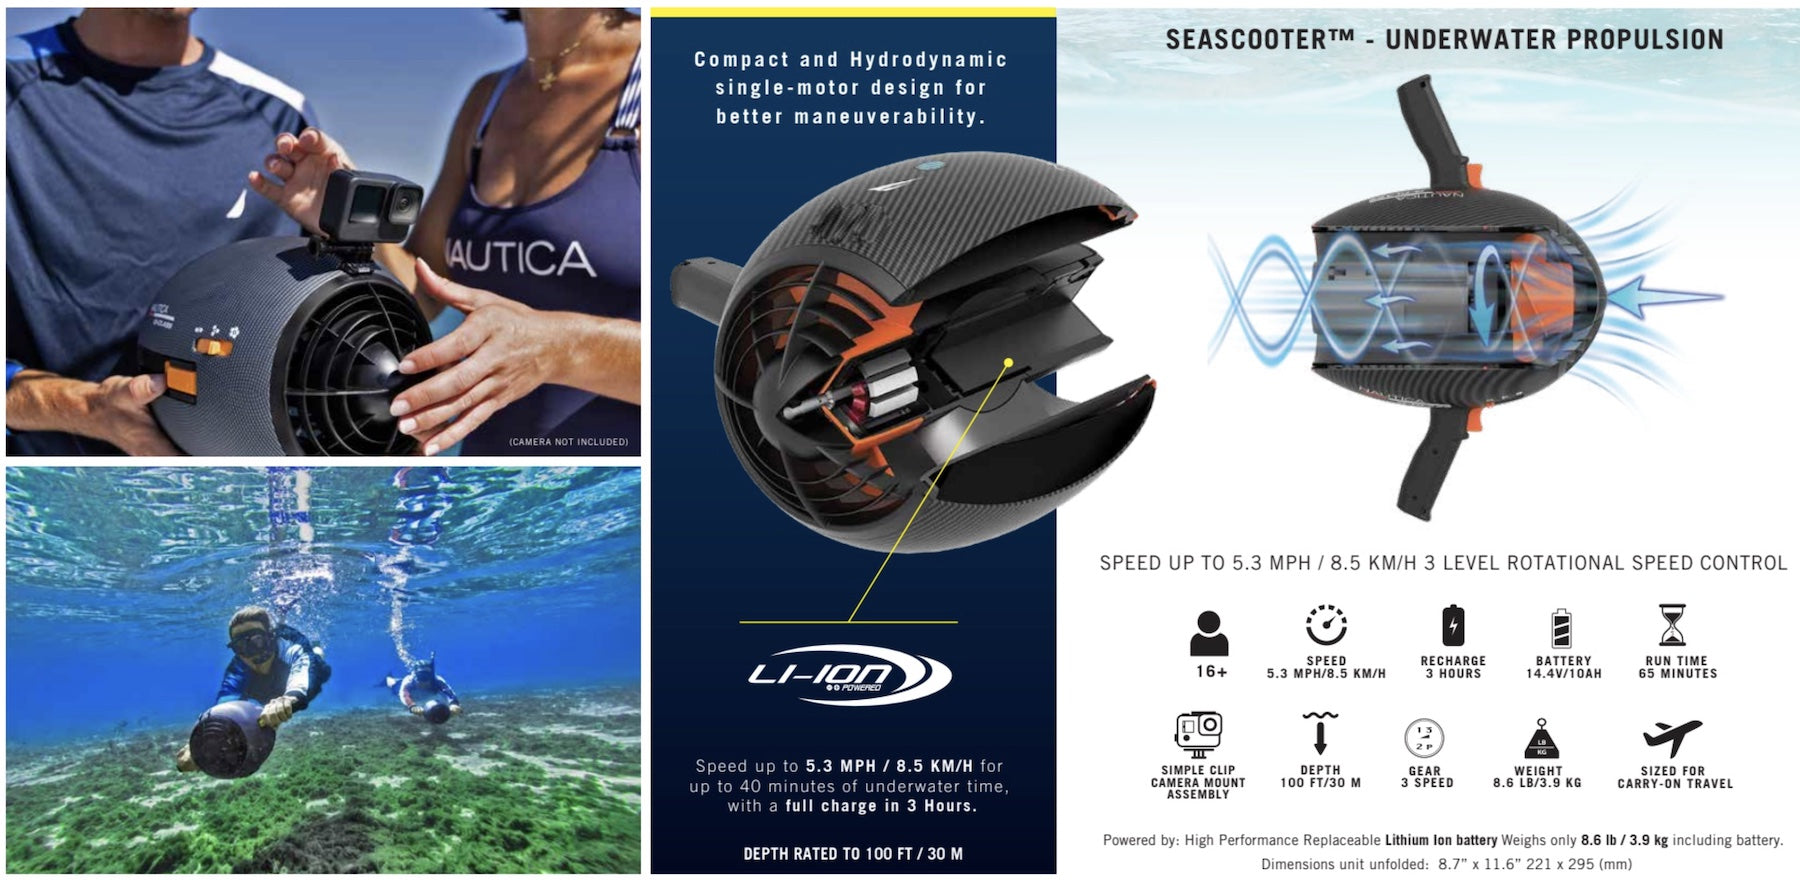 We see a couple of snorkelers using the Nautica Q-Class seascooter for sale. We also see the flow of the water through the motor in a diagram.